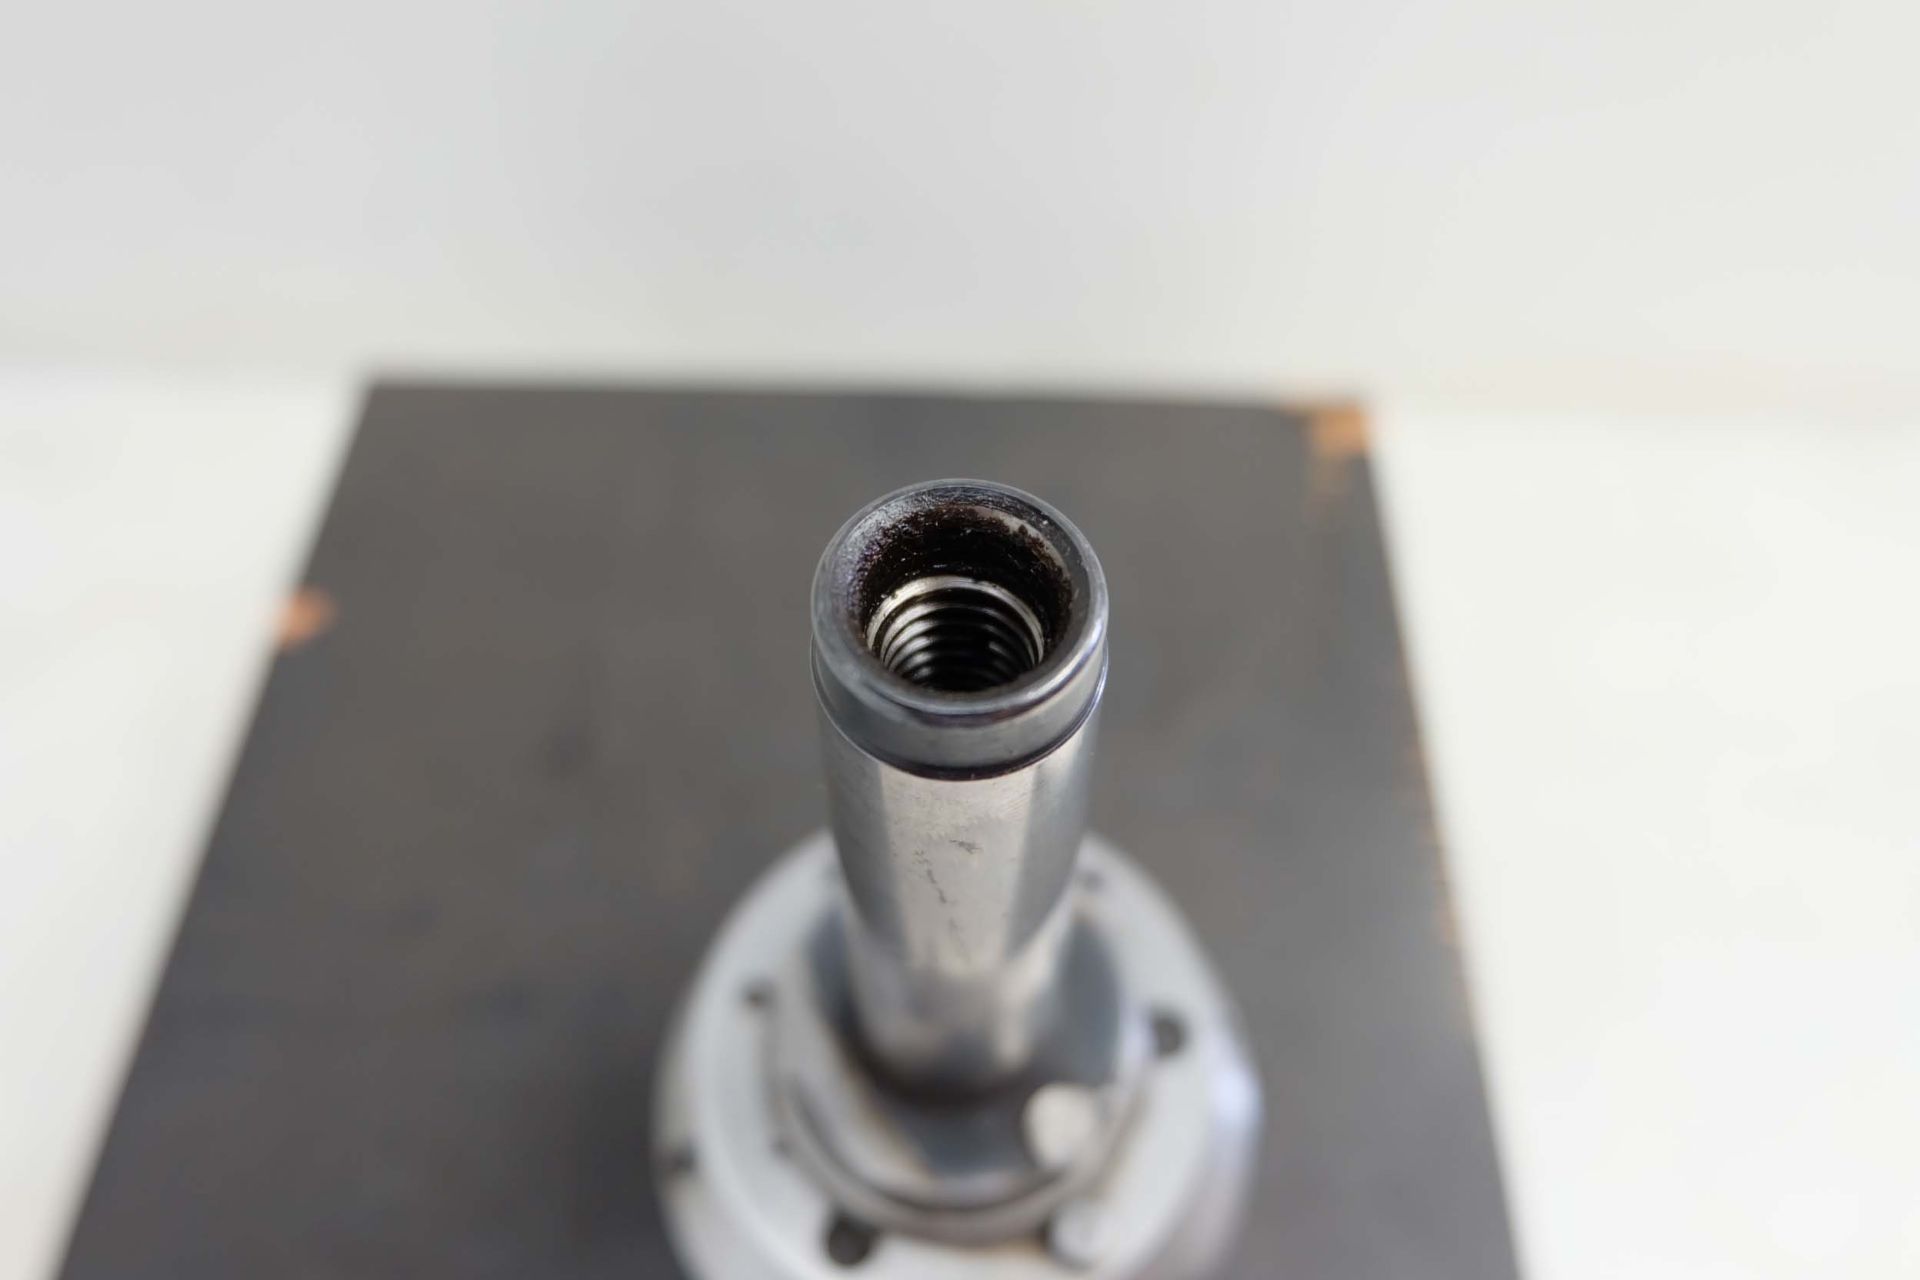 Wohlhaupter UPA3 Boring Head. Adjustment Slide45mm. Size of Head 85mm. Tool Hole Size: 19mm (3/4"). - Image 7 of 9